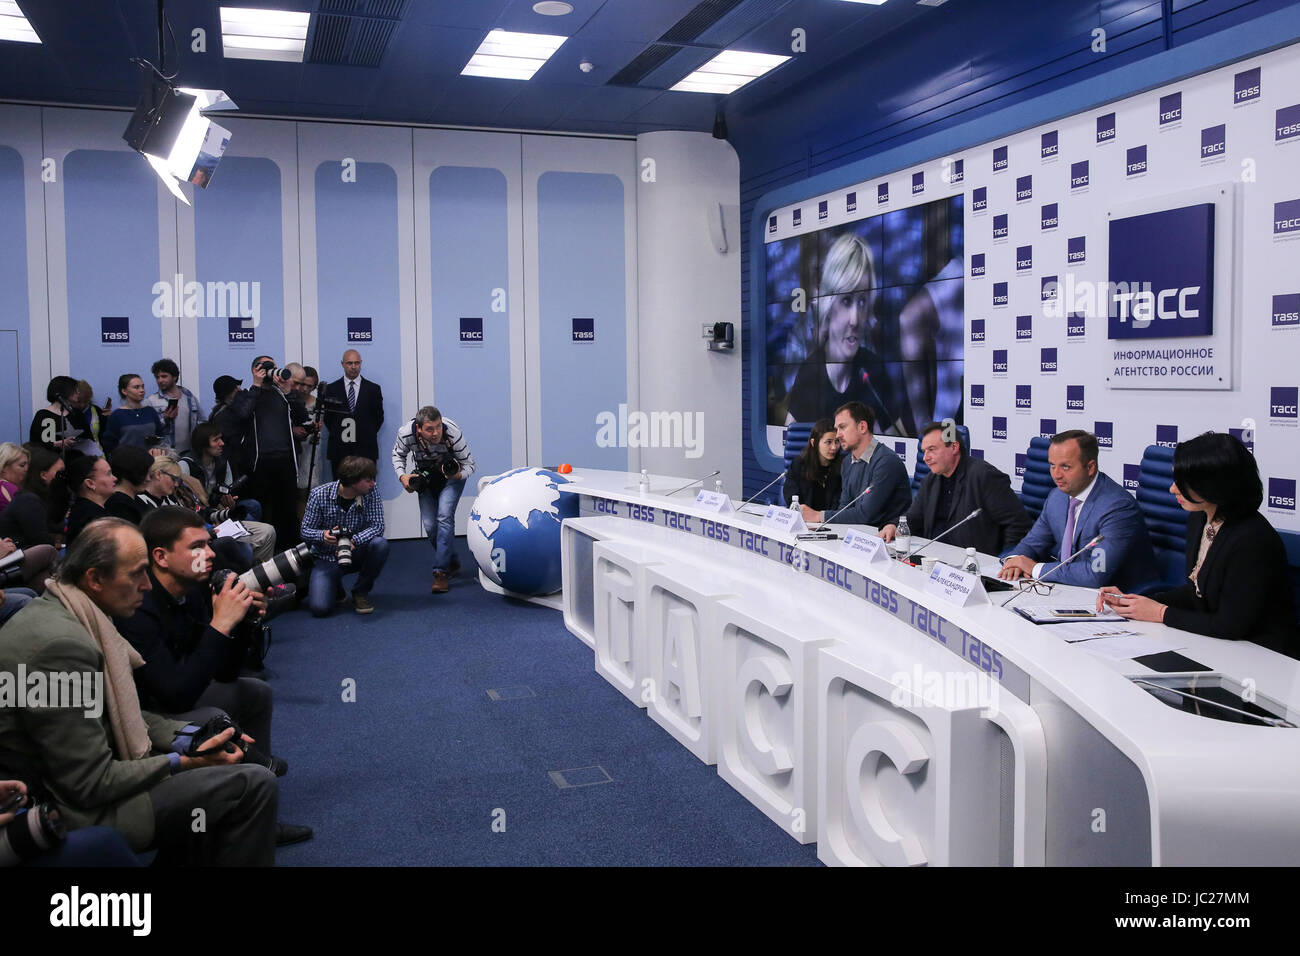 Moscow, Russia. 13th June, 2017. At press conference on Alexei Uchitel film Matilda. Credit: Victor Vytolskiy/Alamy Live News Stock Photo